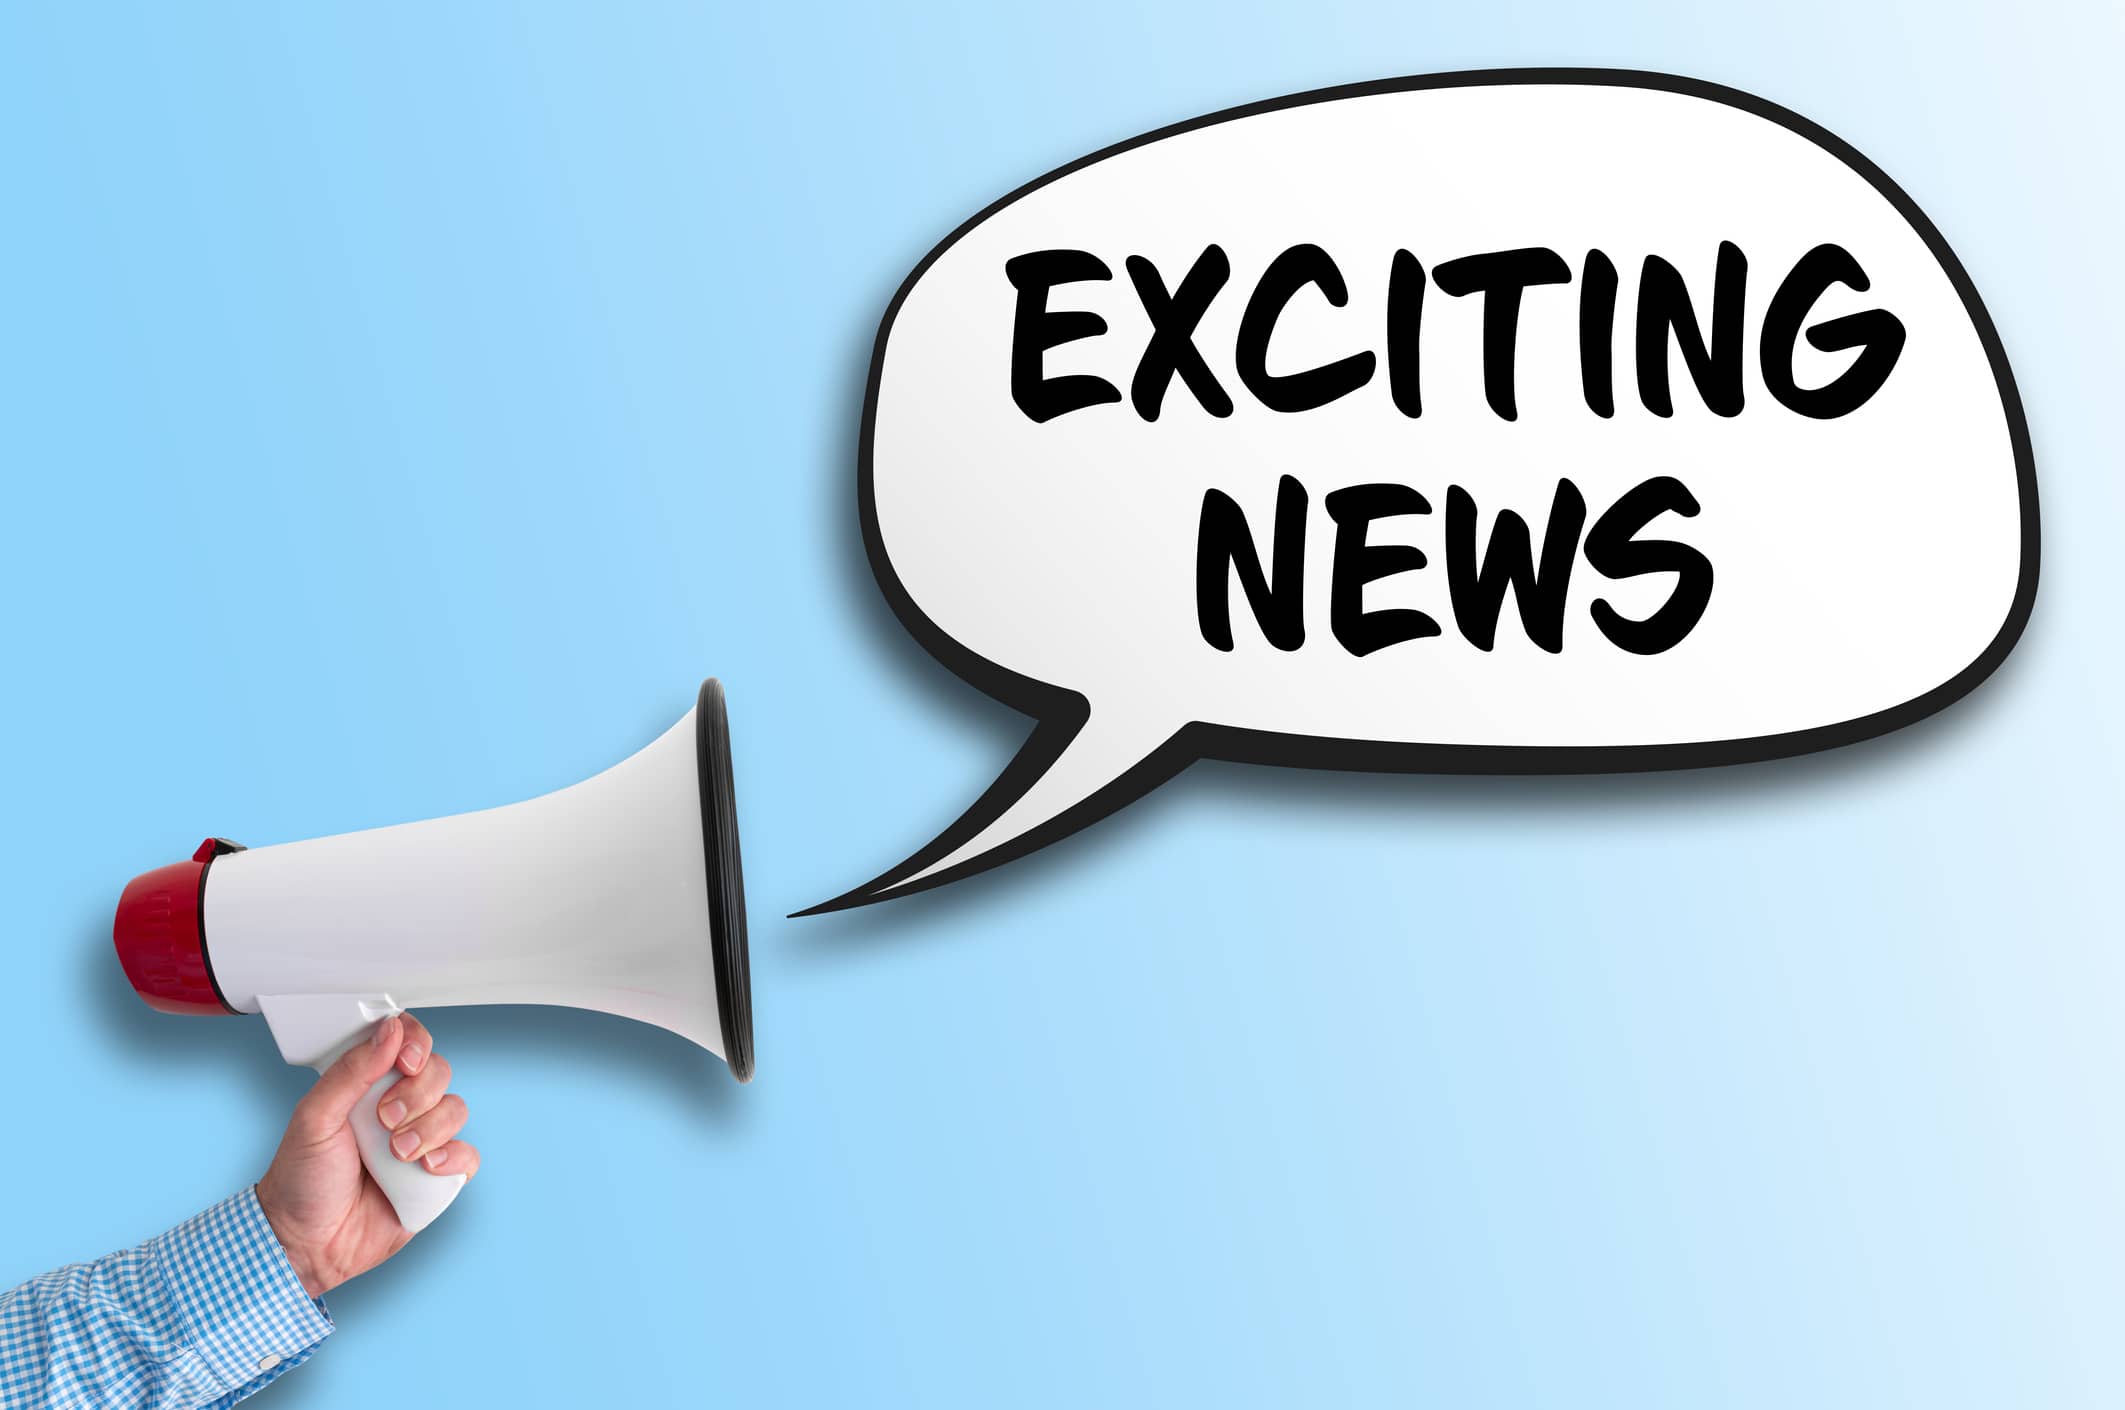 hand holding megaphone and speech bubble with text EXCITING NEWS against light blue background